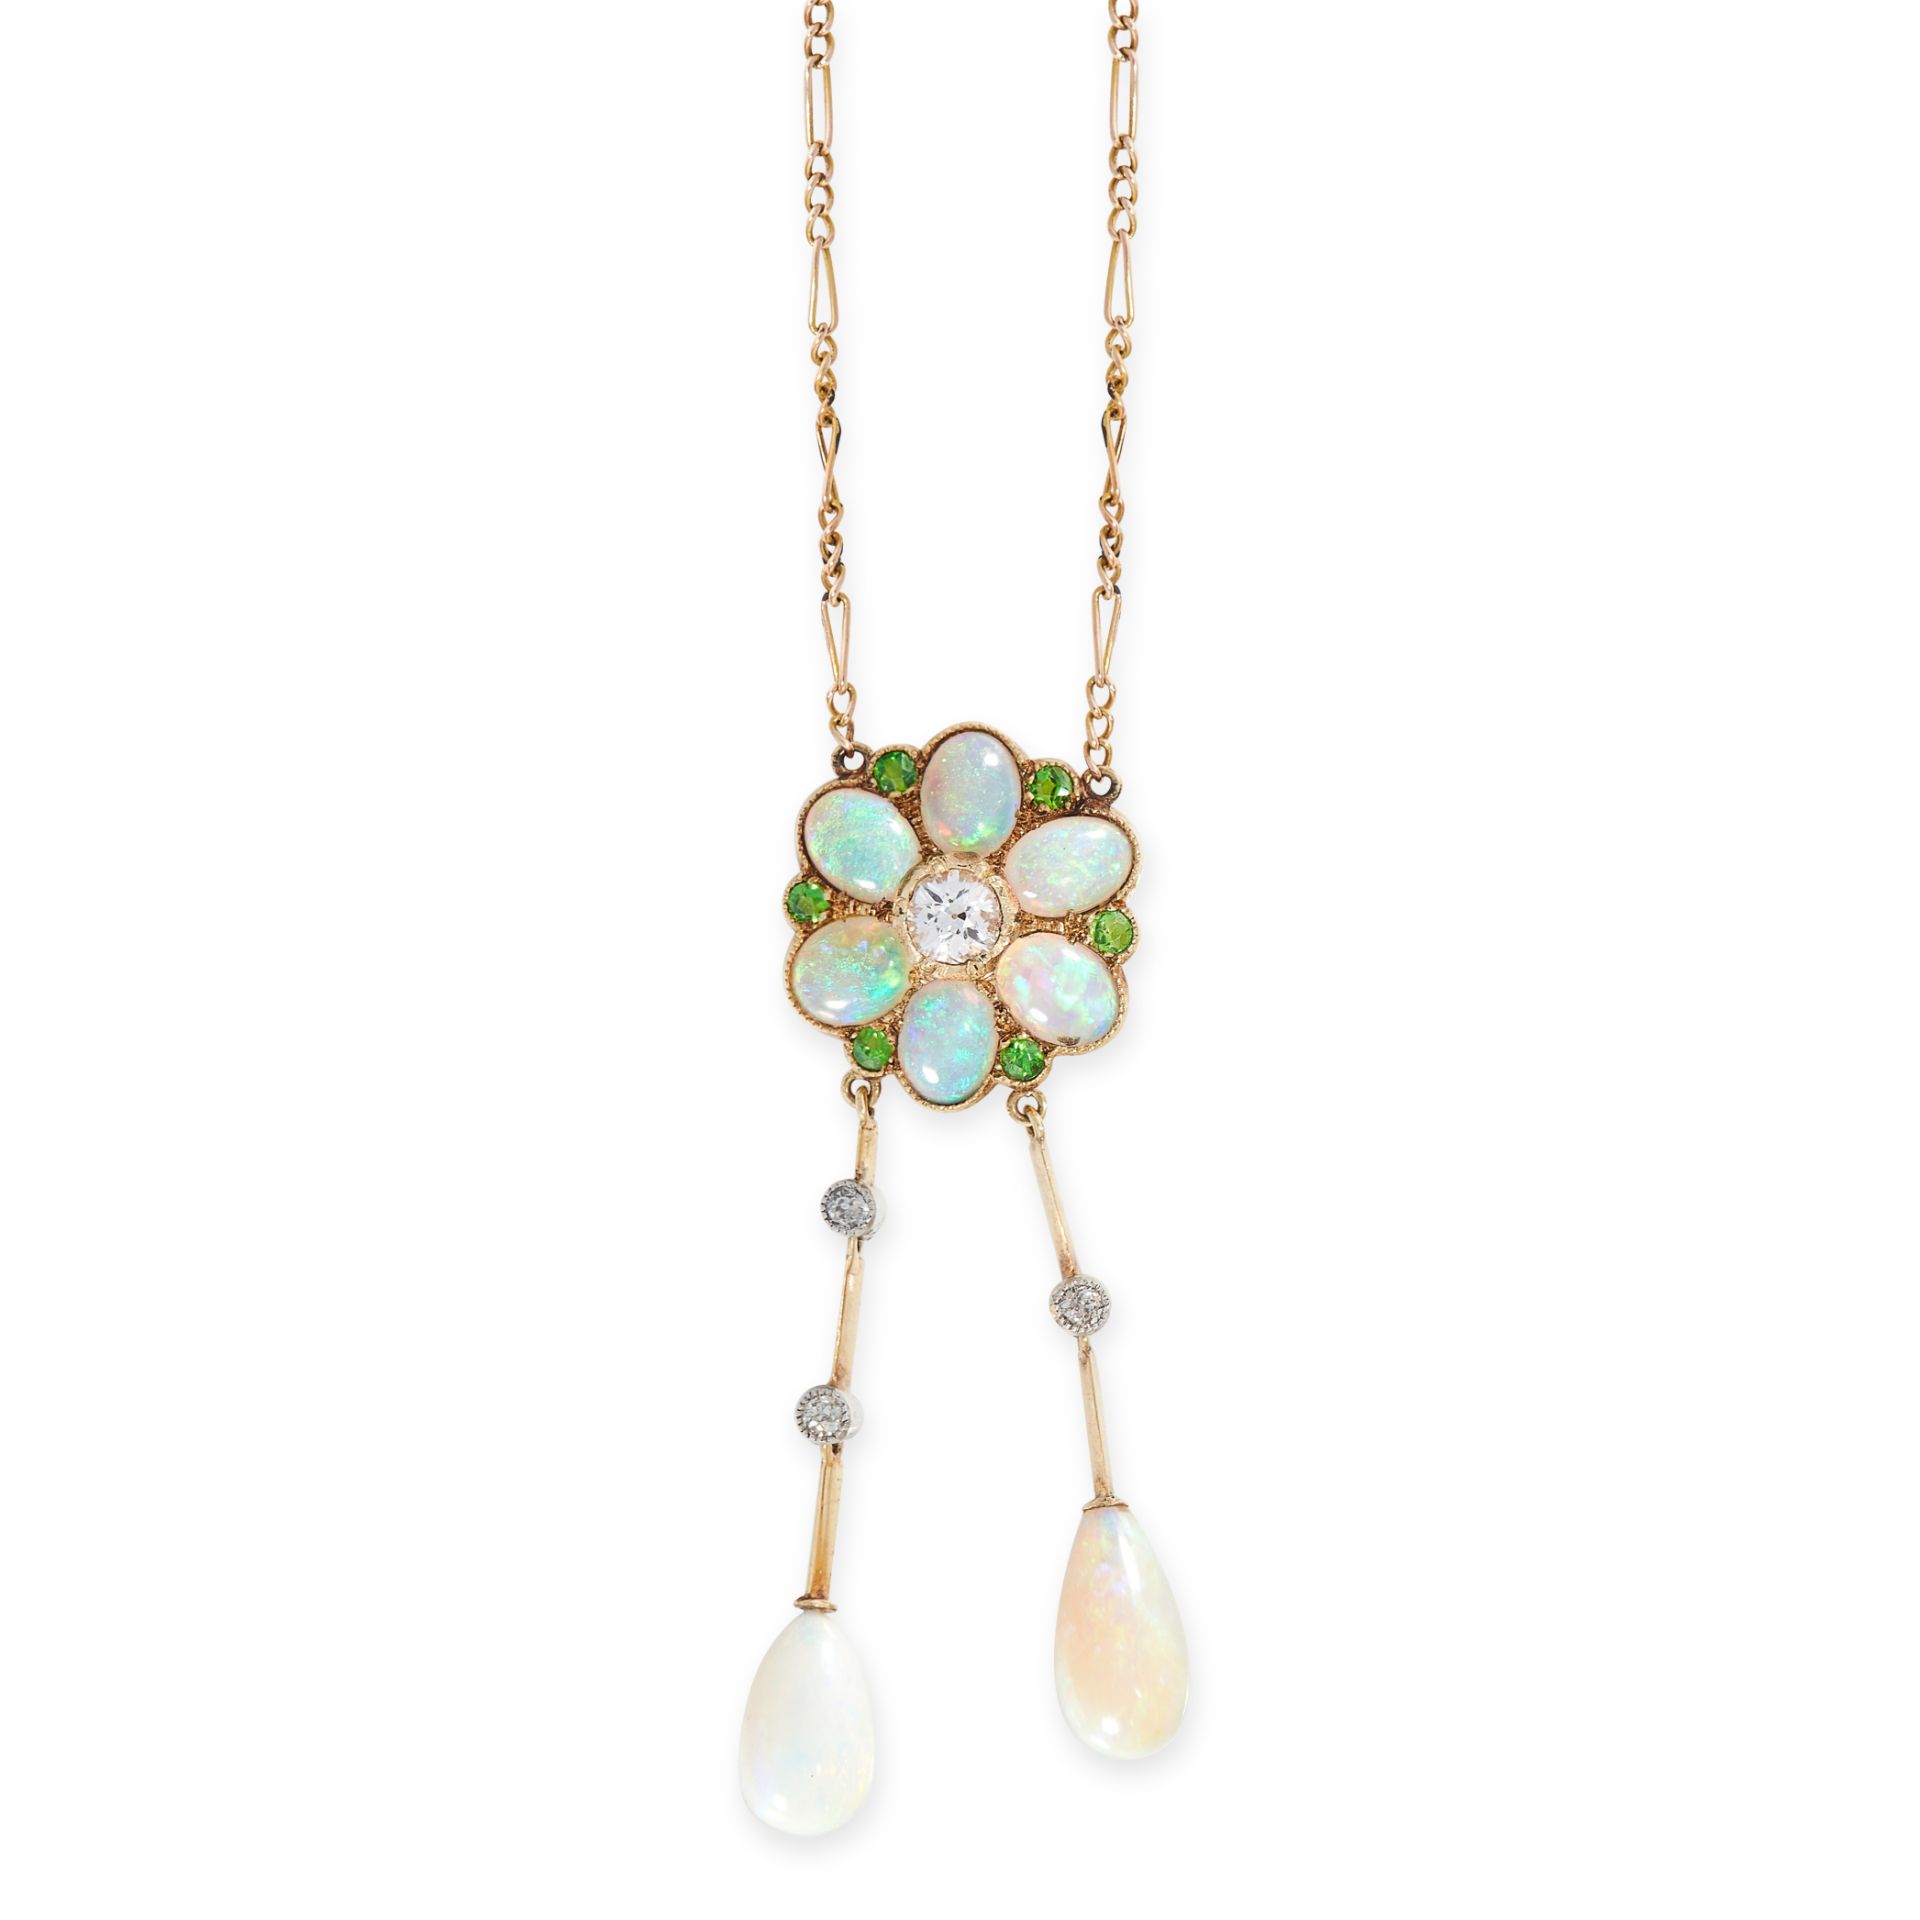 AN ANTIQUE OPAL, DEMANTOID GARNET AND DIAMOND LAVALIER NECKLACE, EARLY 20TH CENTURY in 15ct yellow